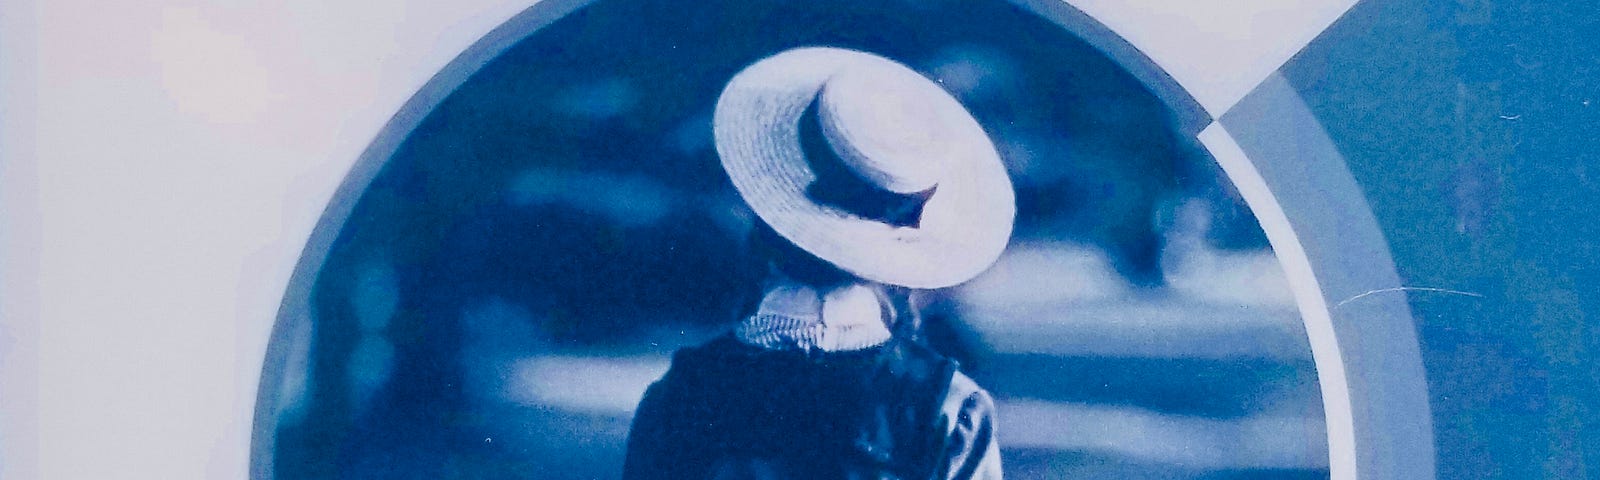 cover of the novel Anne of Green Gables picturing a girl facing backwards wearing a hat and early 20th Century dress.